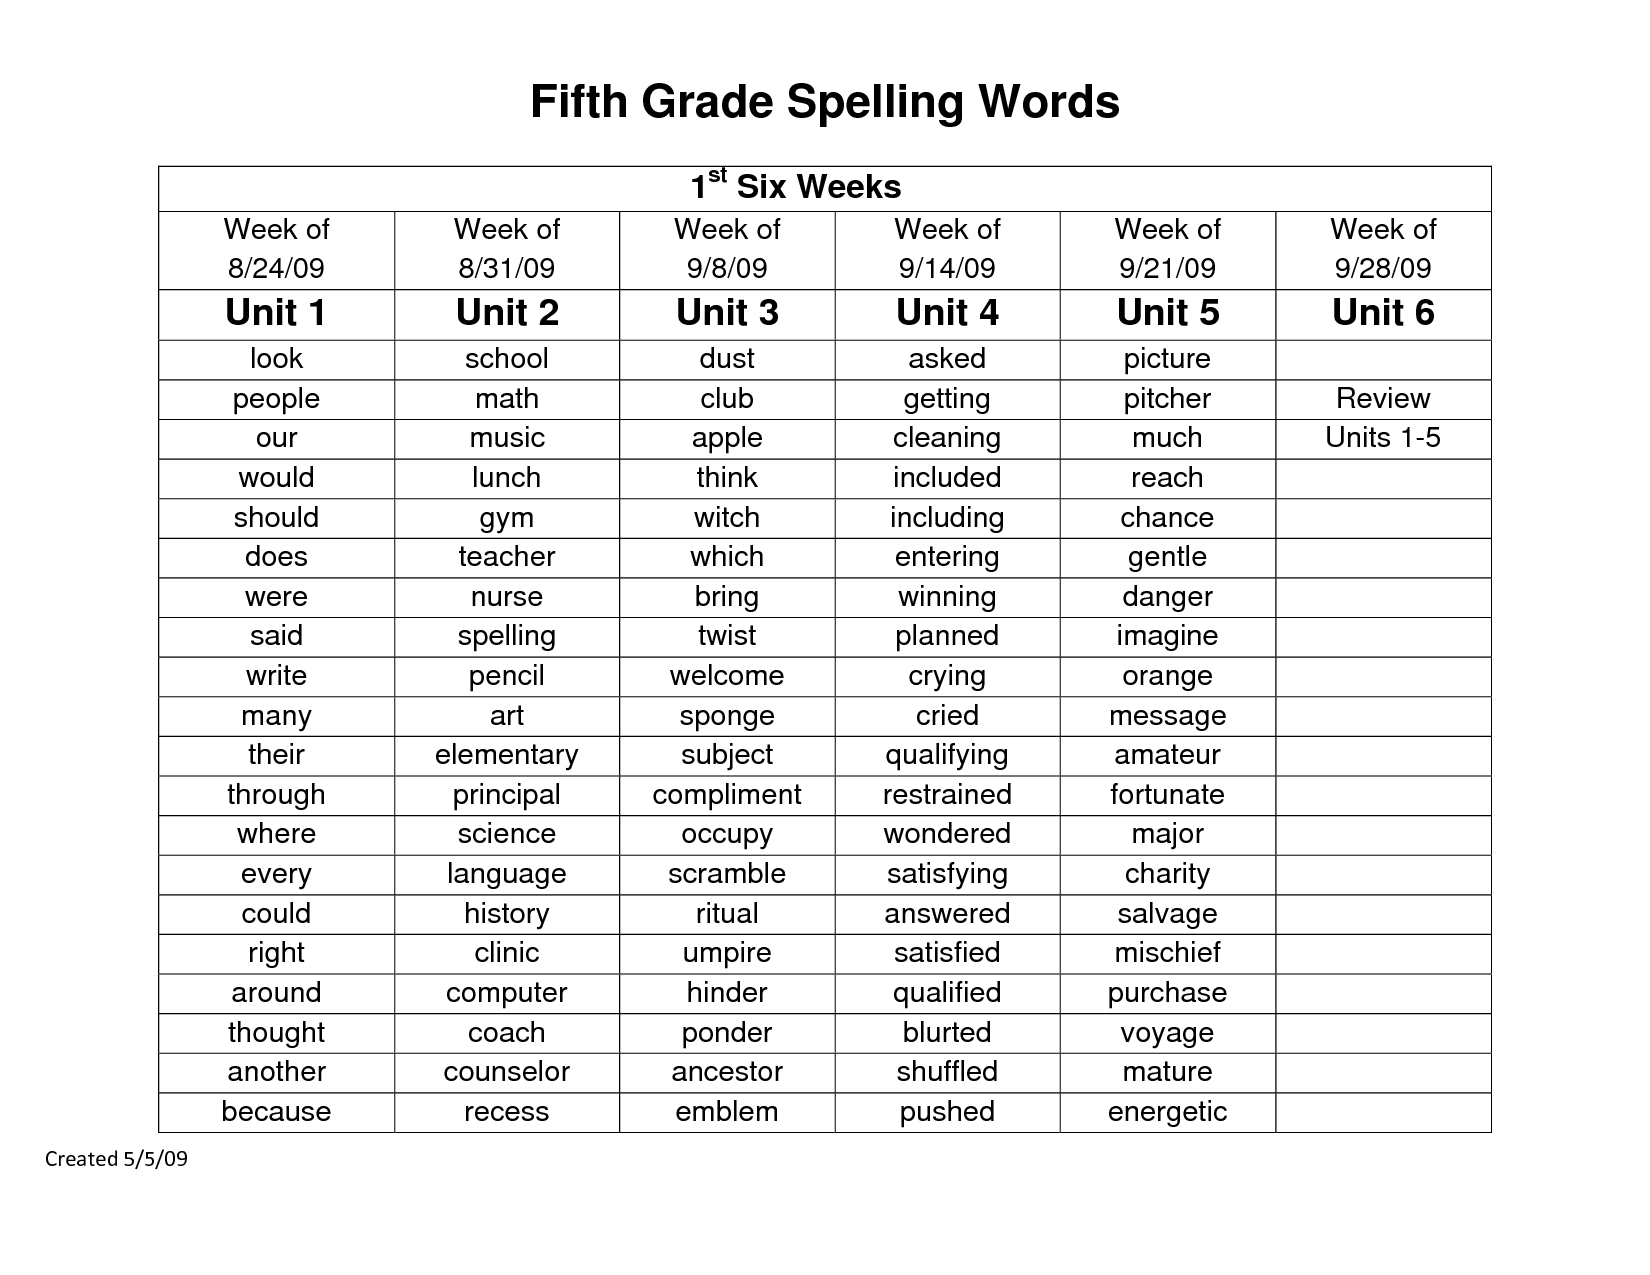 15-best-images-of-5th-grade-reading-vocabulary-worksheets-5th-grade